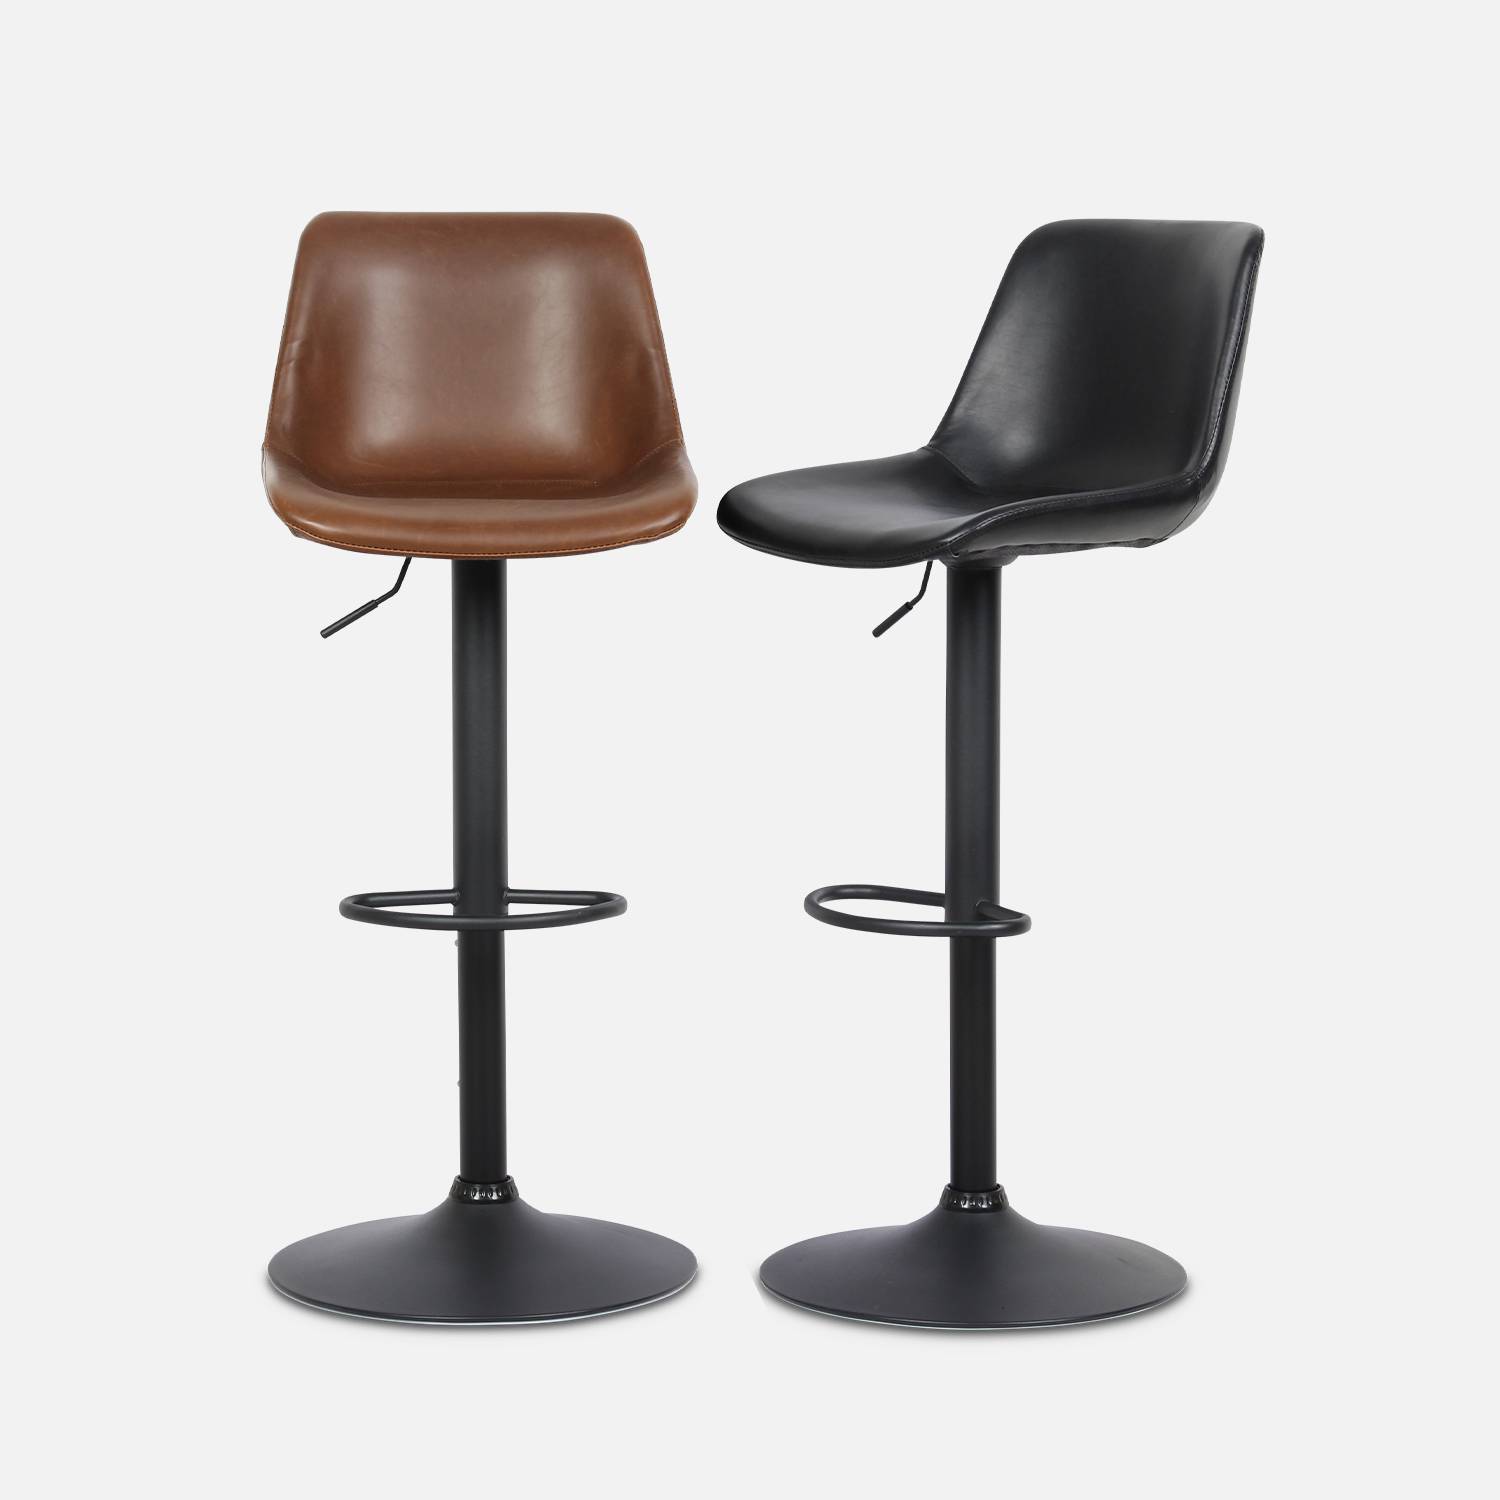 Pair of faux leather, square backrest, adjustable bar stools, seat height 61.5 - 83.5cm - Noah - Brown Photo8